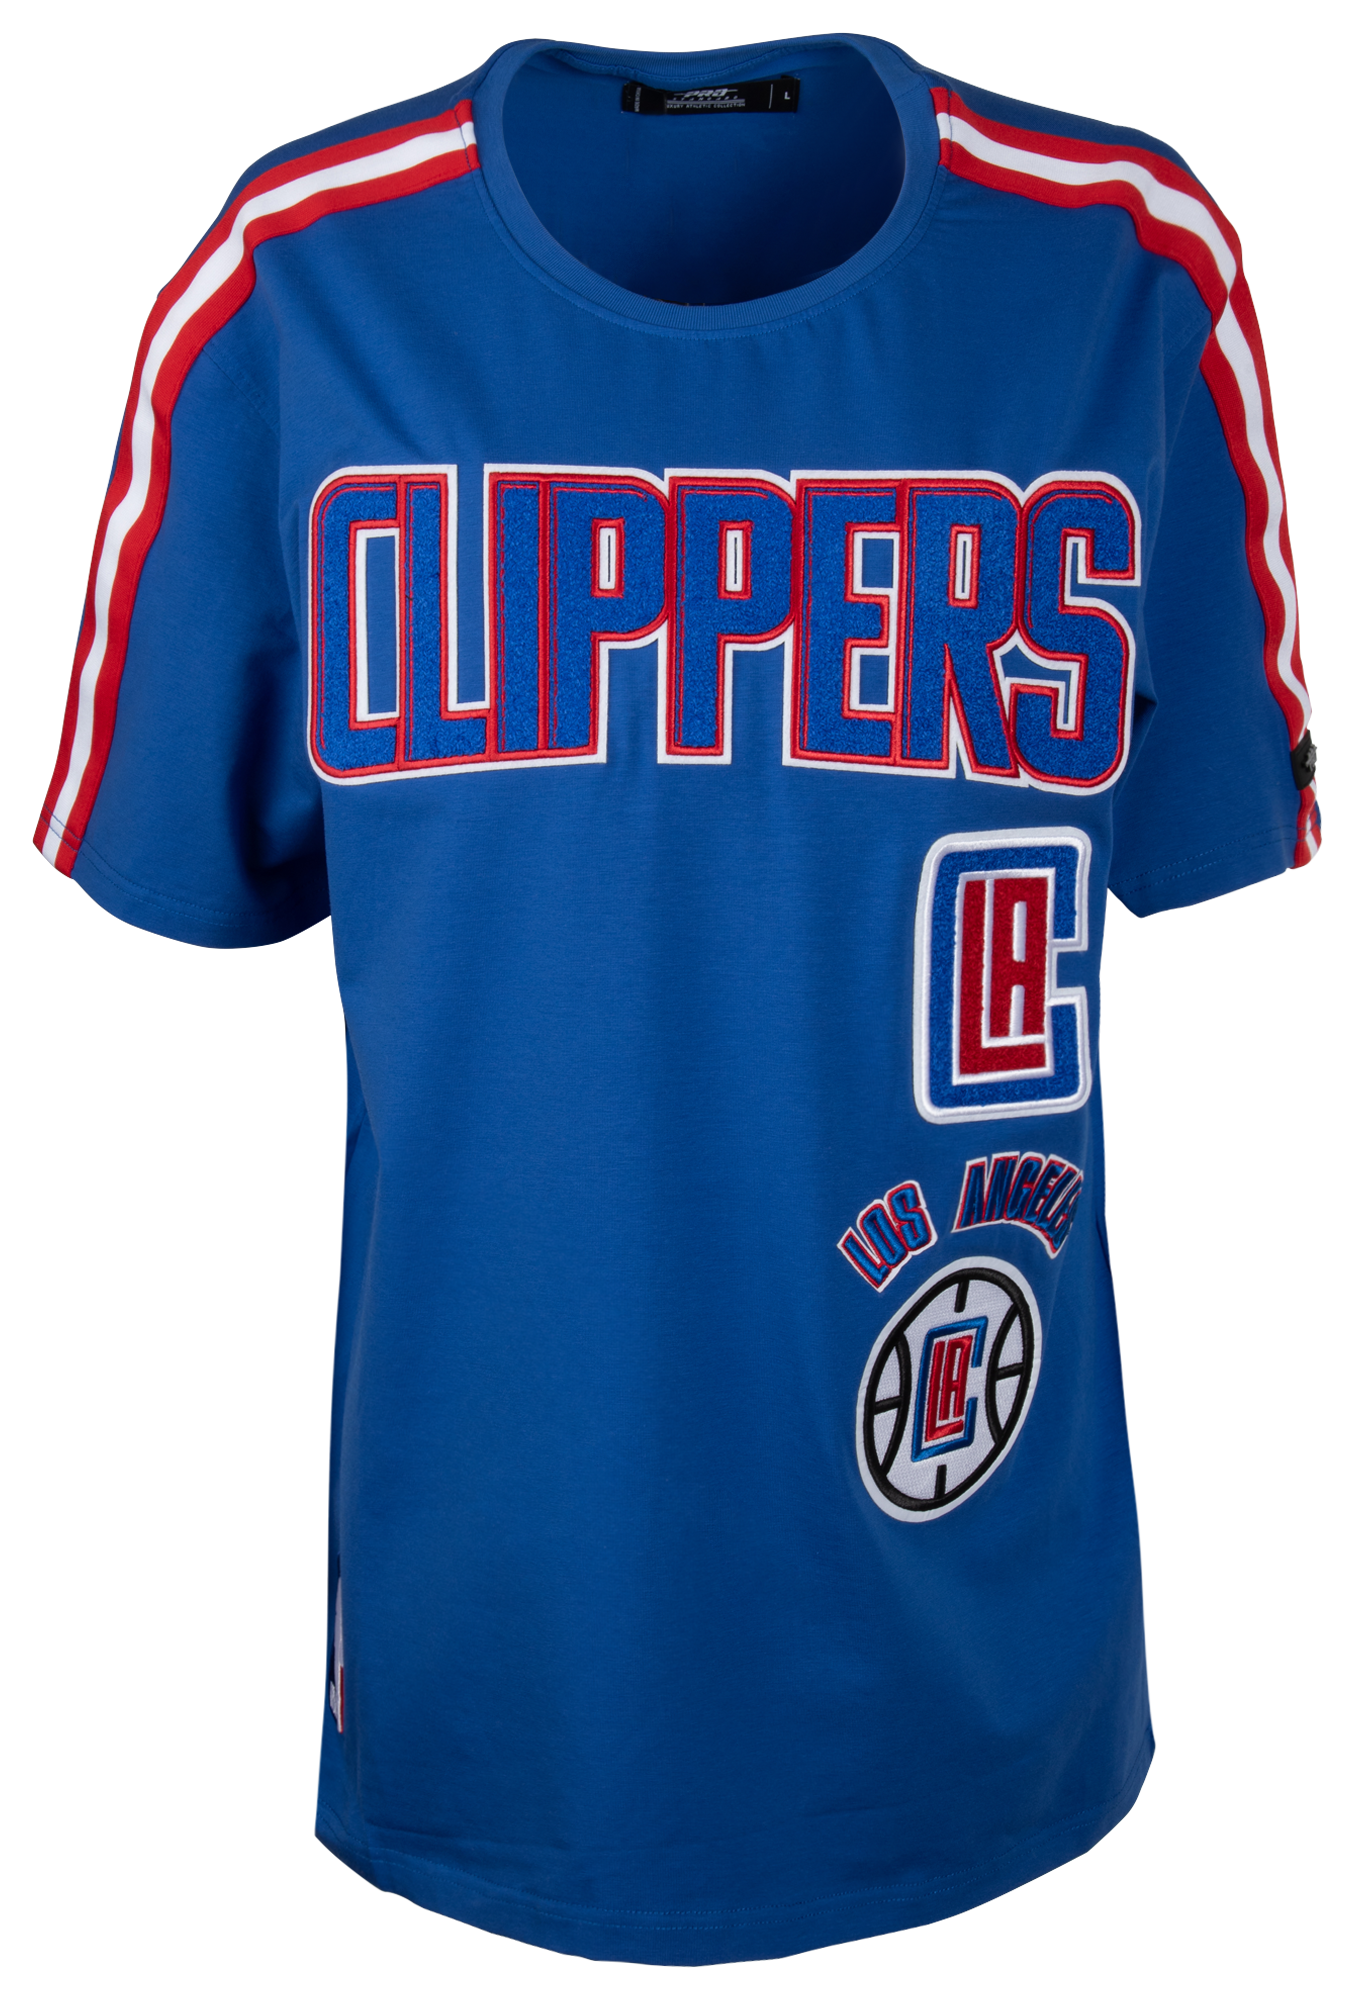 Clippers T Shirt -  Canada